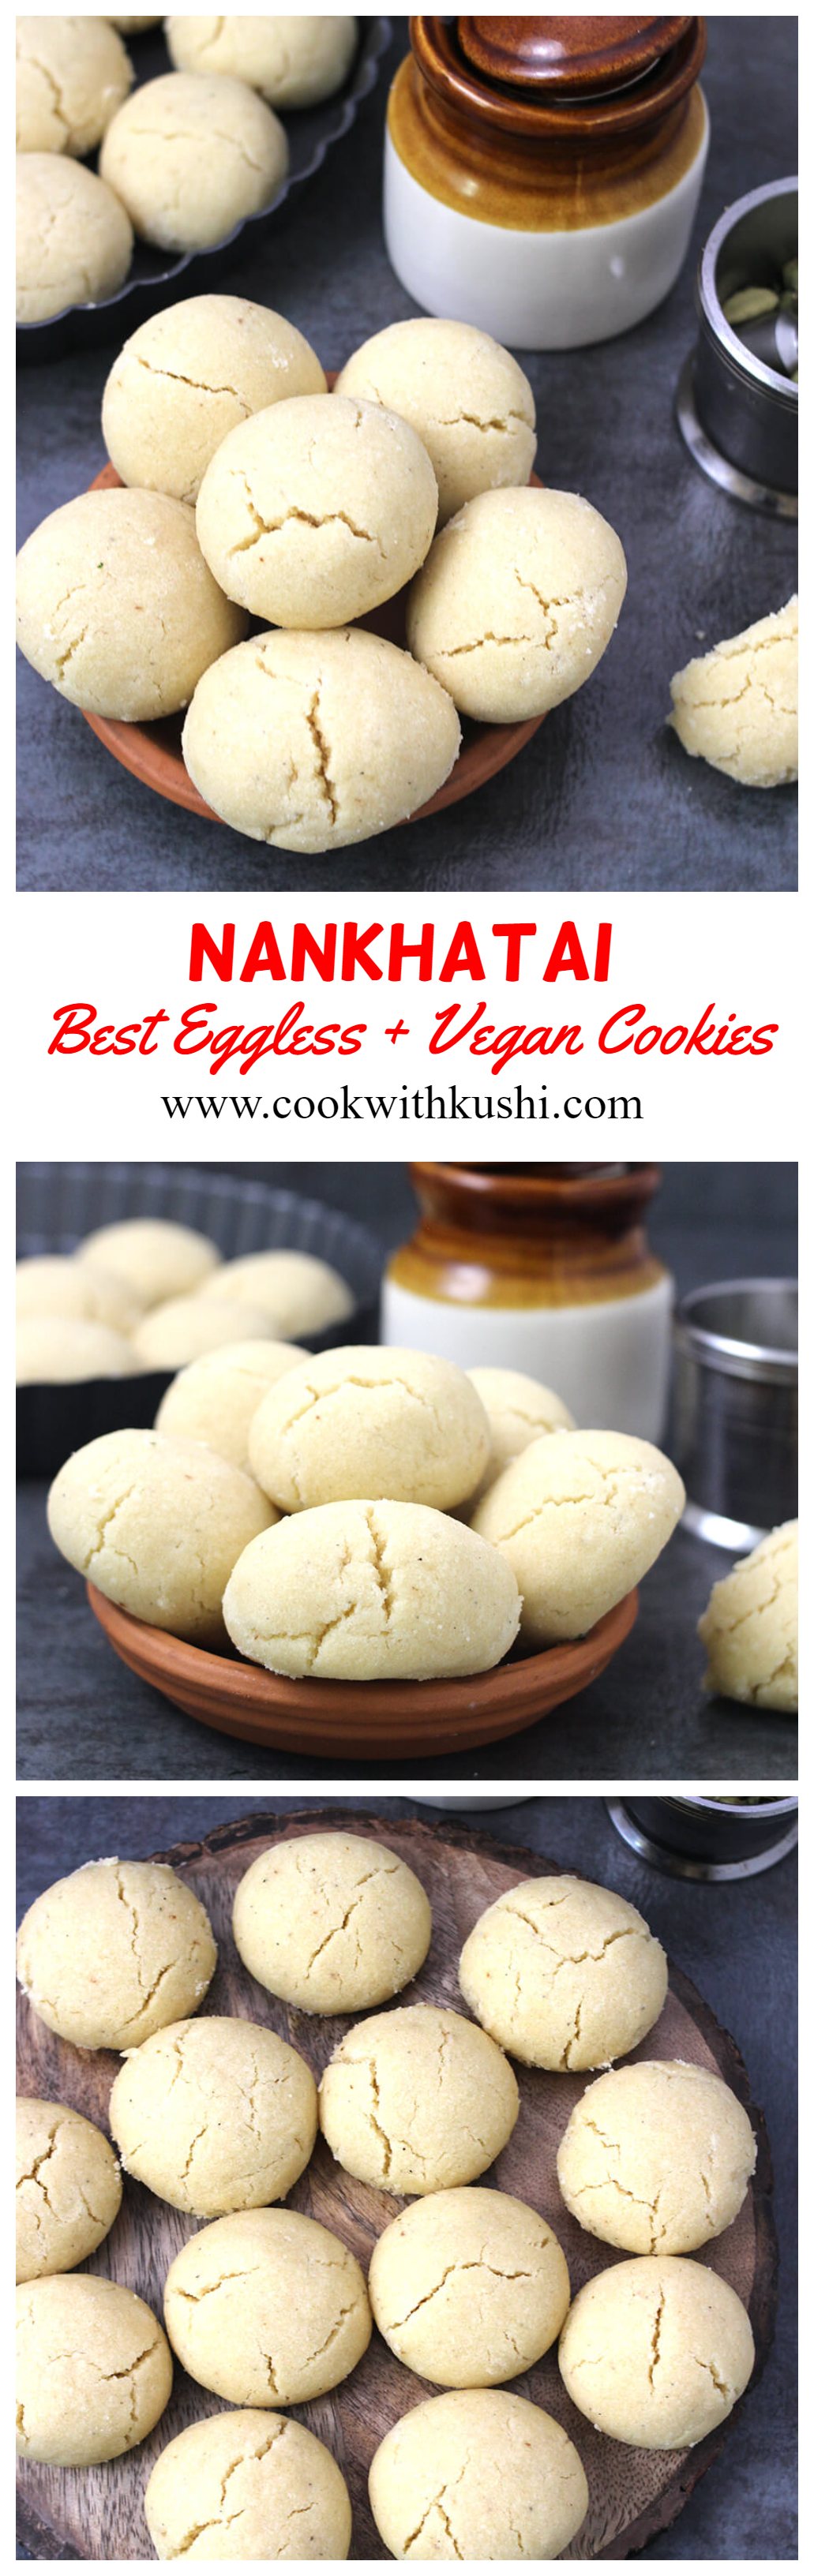 Nankhatai are melt in mouth, flavorful, eggless Indian biscuits or shortbread cookies prepared using just 5 ingredients #egglesscookies #vegancookies #Buttercookies #indiancookies #indianfestivalrecipes #ganeshchaturthisweets #diwwalisweets #festivalrecipes #indiansweets #Mithai #meetha #konkanirecipes #popularindiansweets